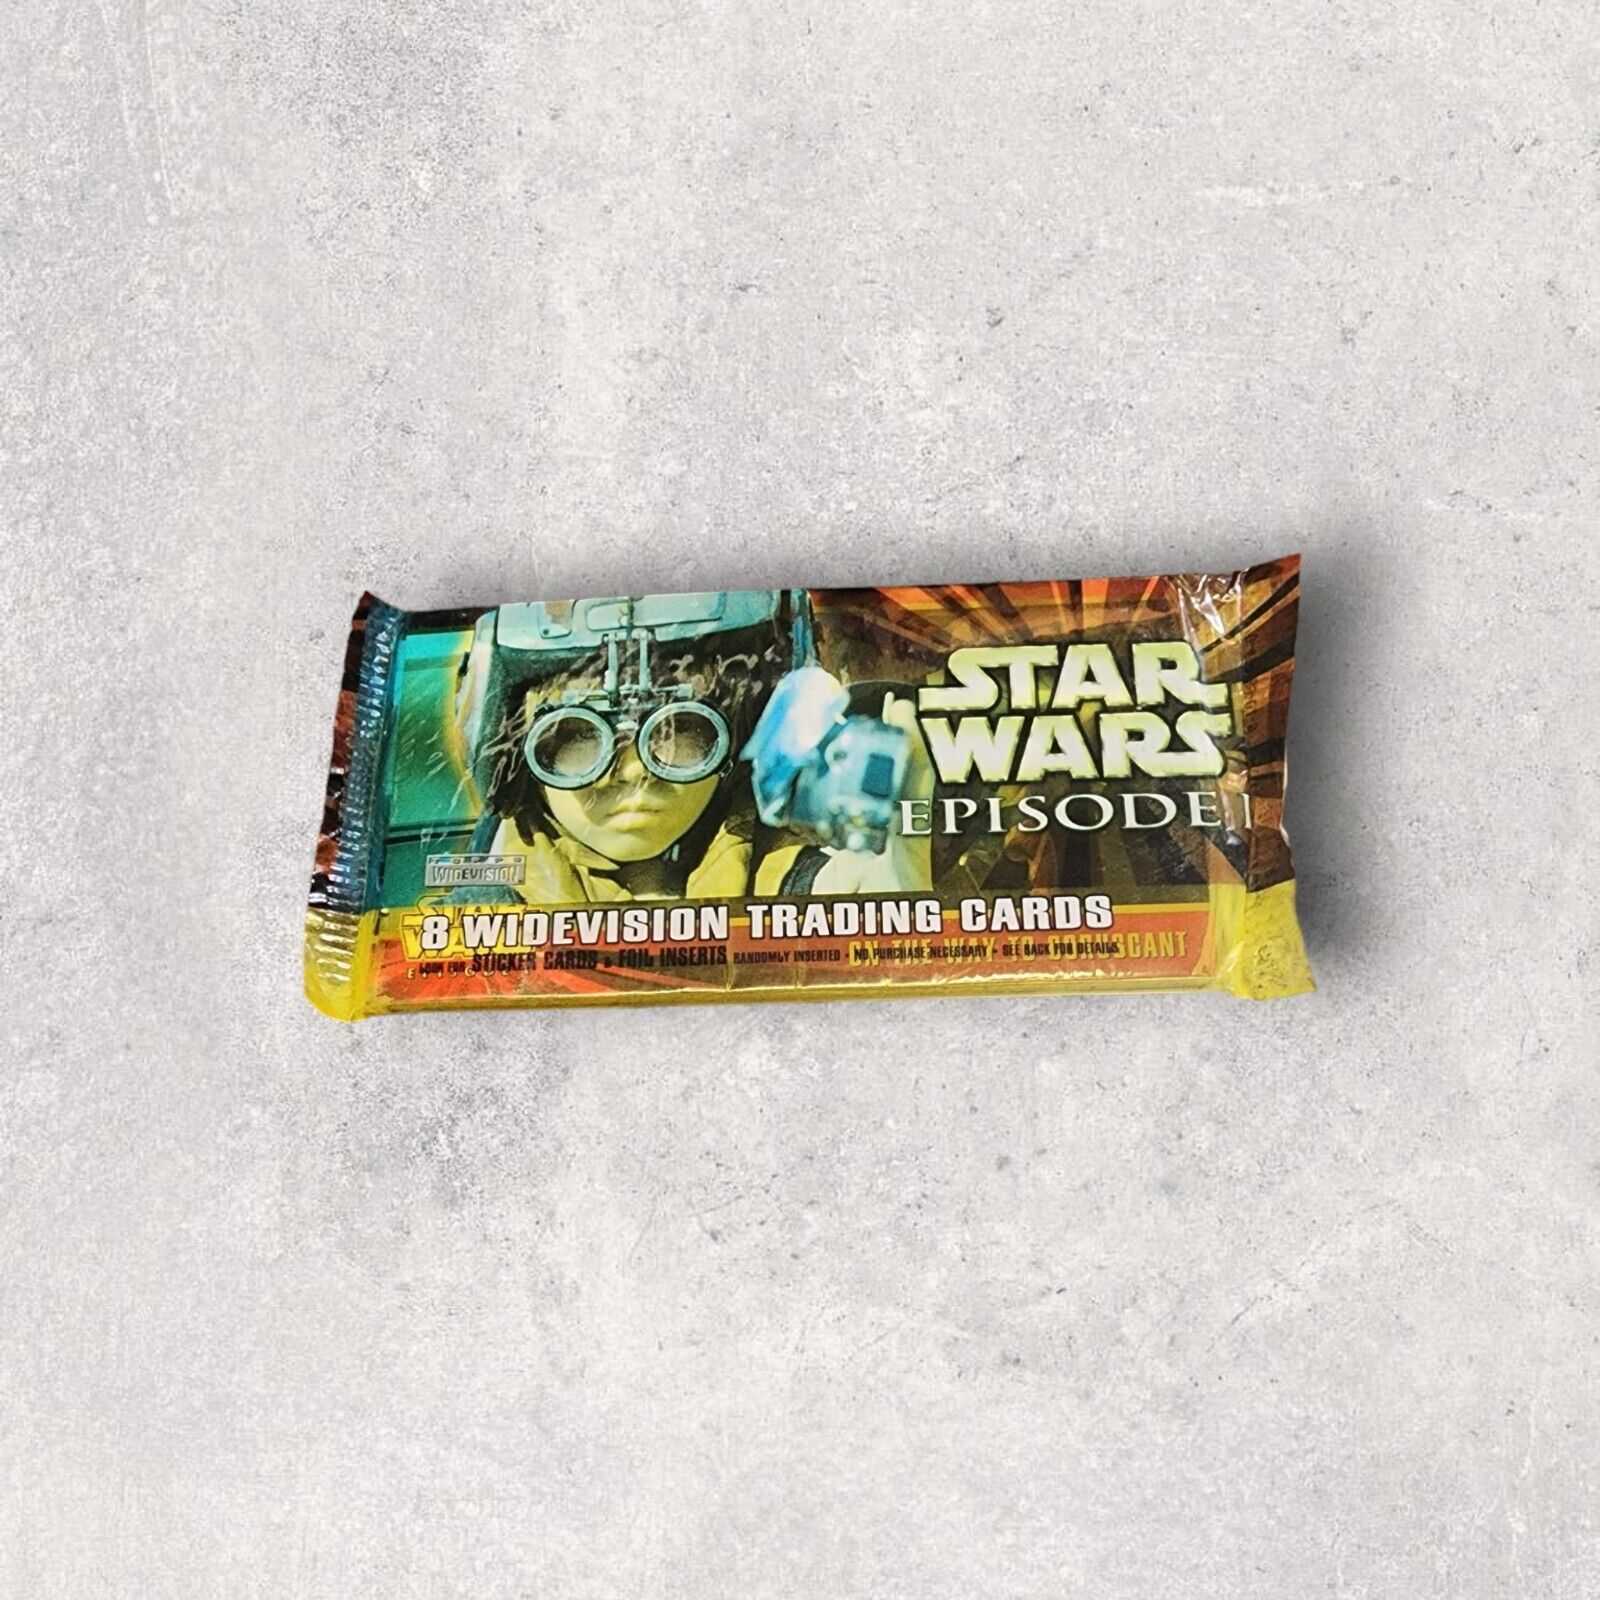 1999 Topps Star Wars Episode 1 Widevision Trading Cards Pack